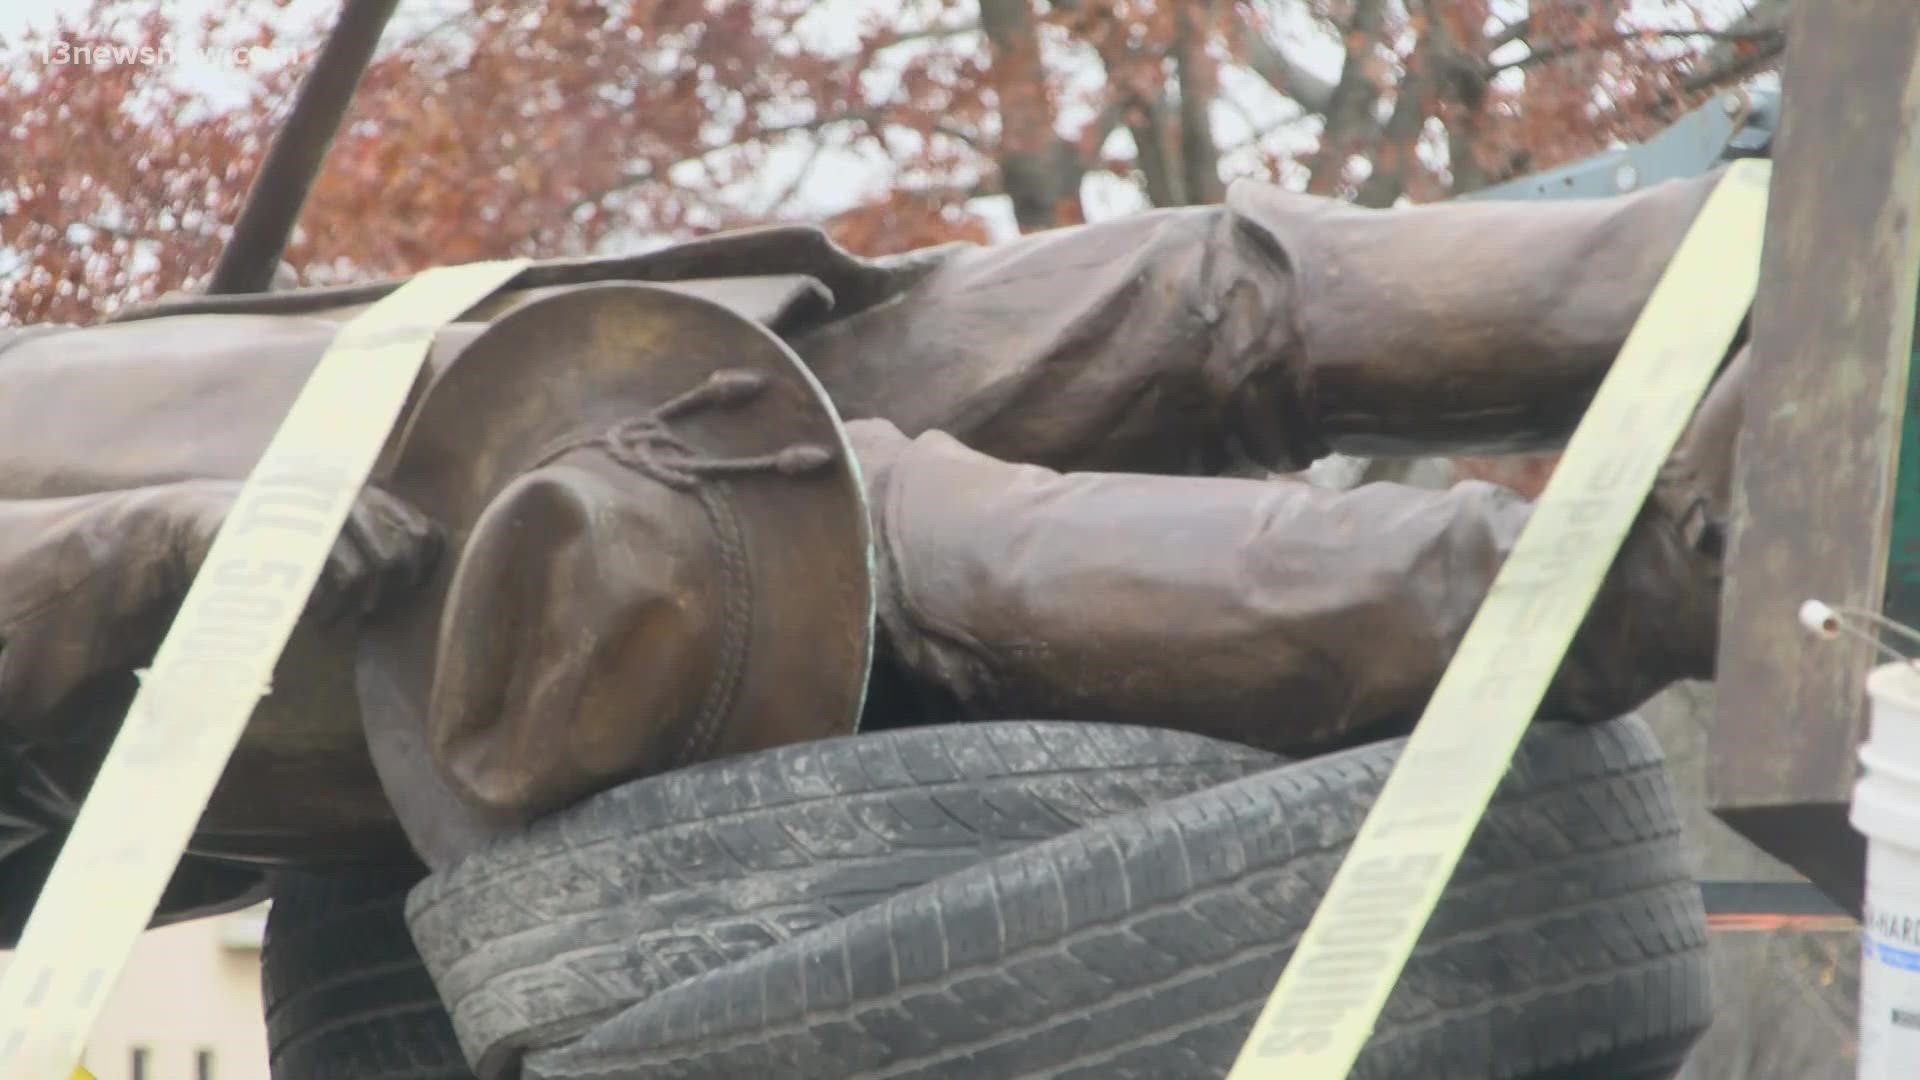 The remains of the former General A.P. Hill will be moved to Culpeper.